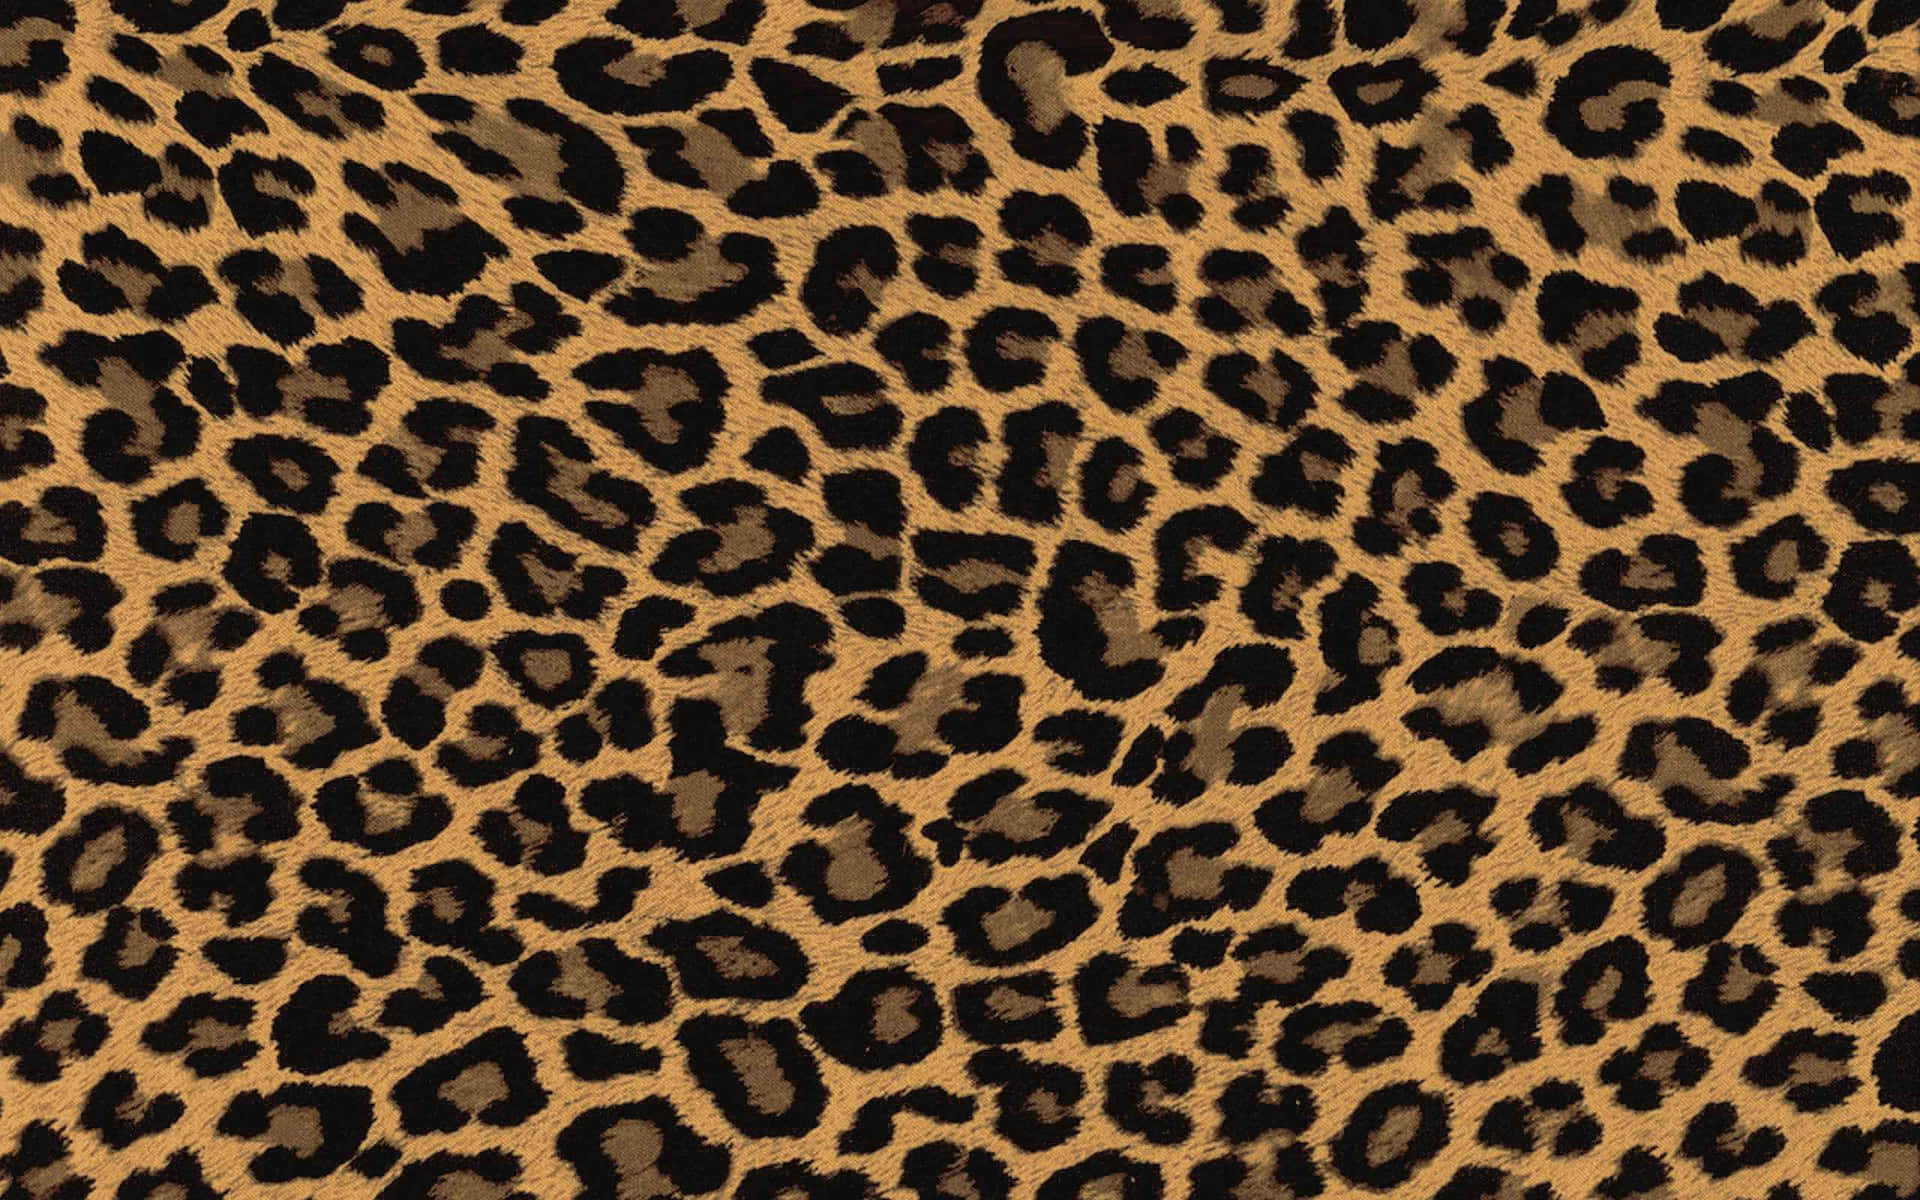 A Leopard Print Fabric With Black And Brown Spots Wallpaper